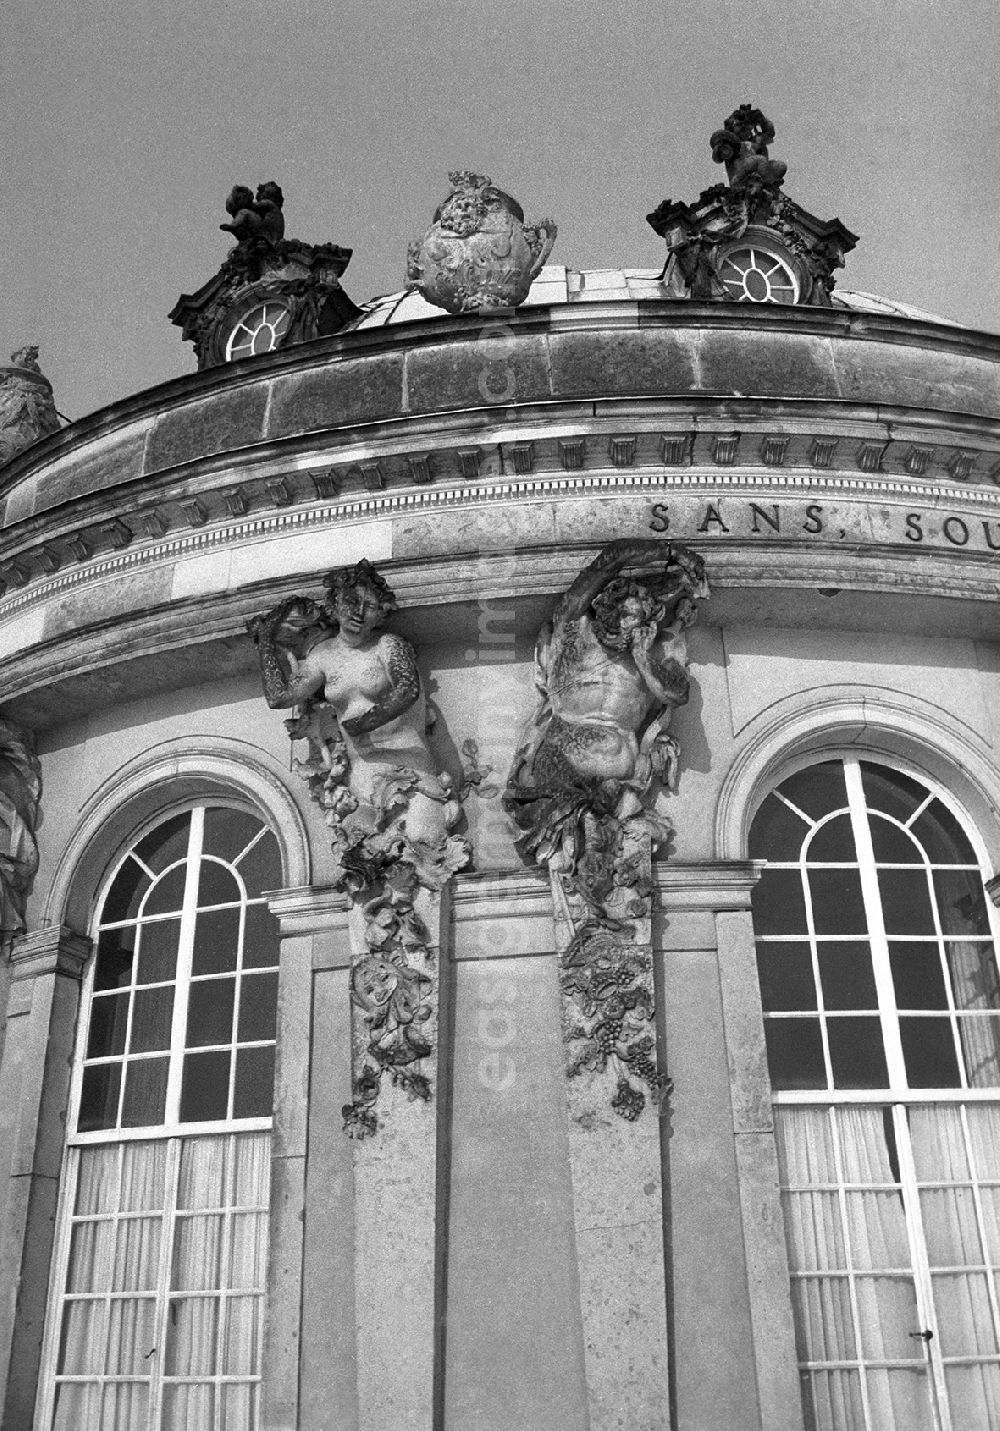 GDR photo archive: Potsdam - Sandstone statues of the sculptor Friedrich Christian Glume in the form of Bacchantes at Sanssouci Palace in Potsdam